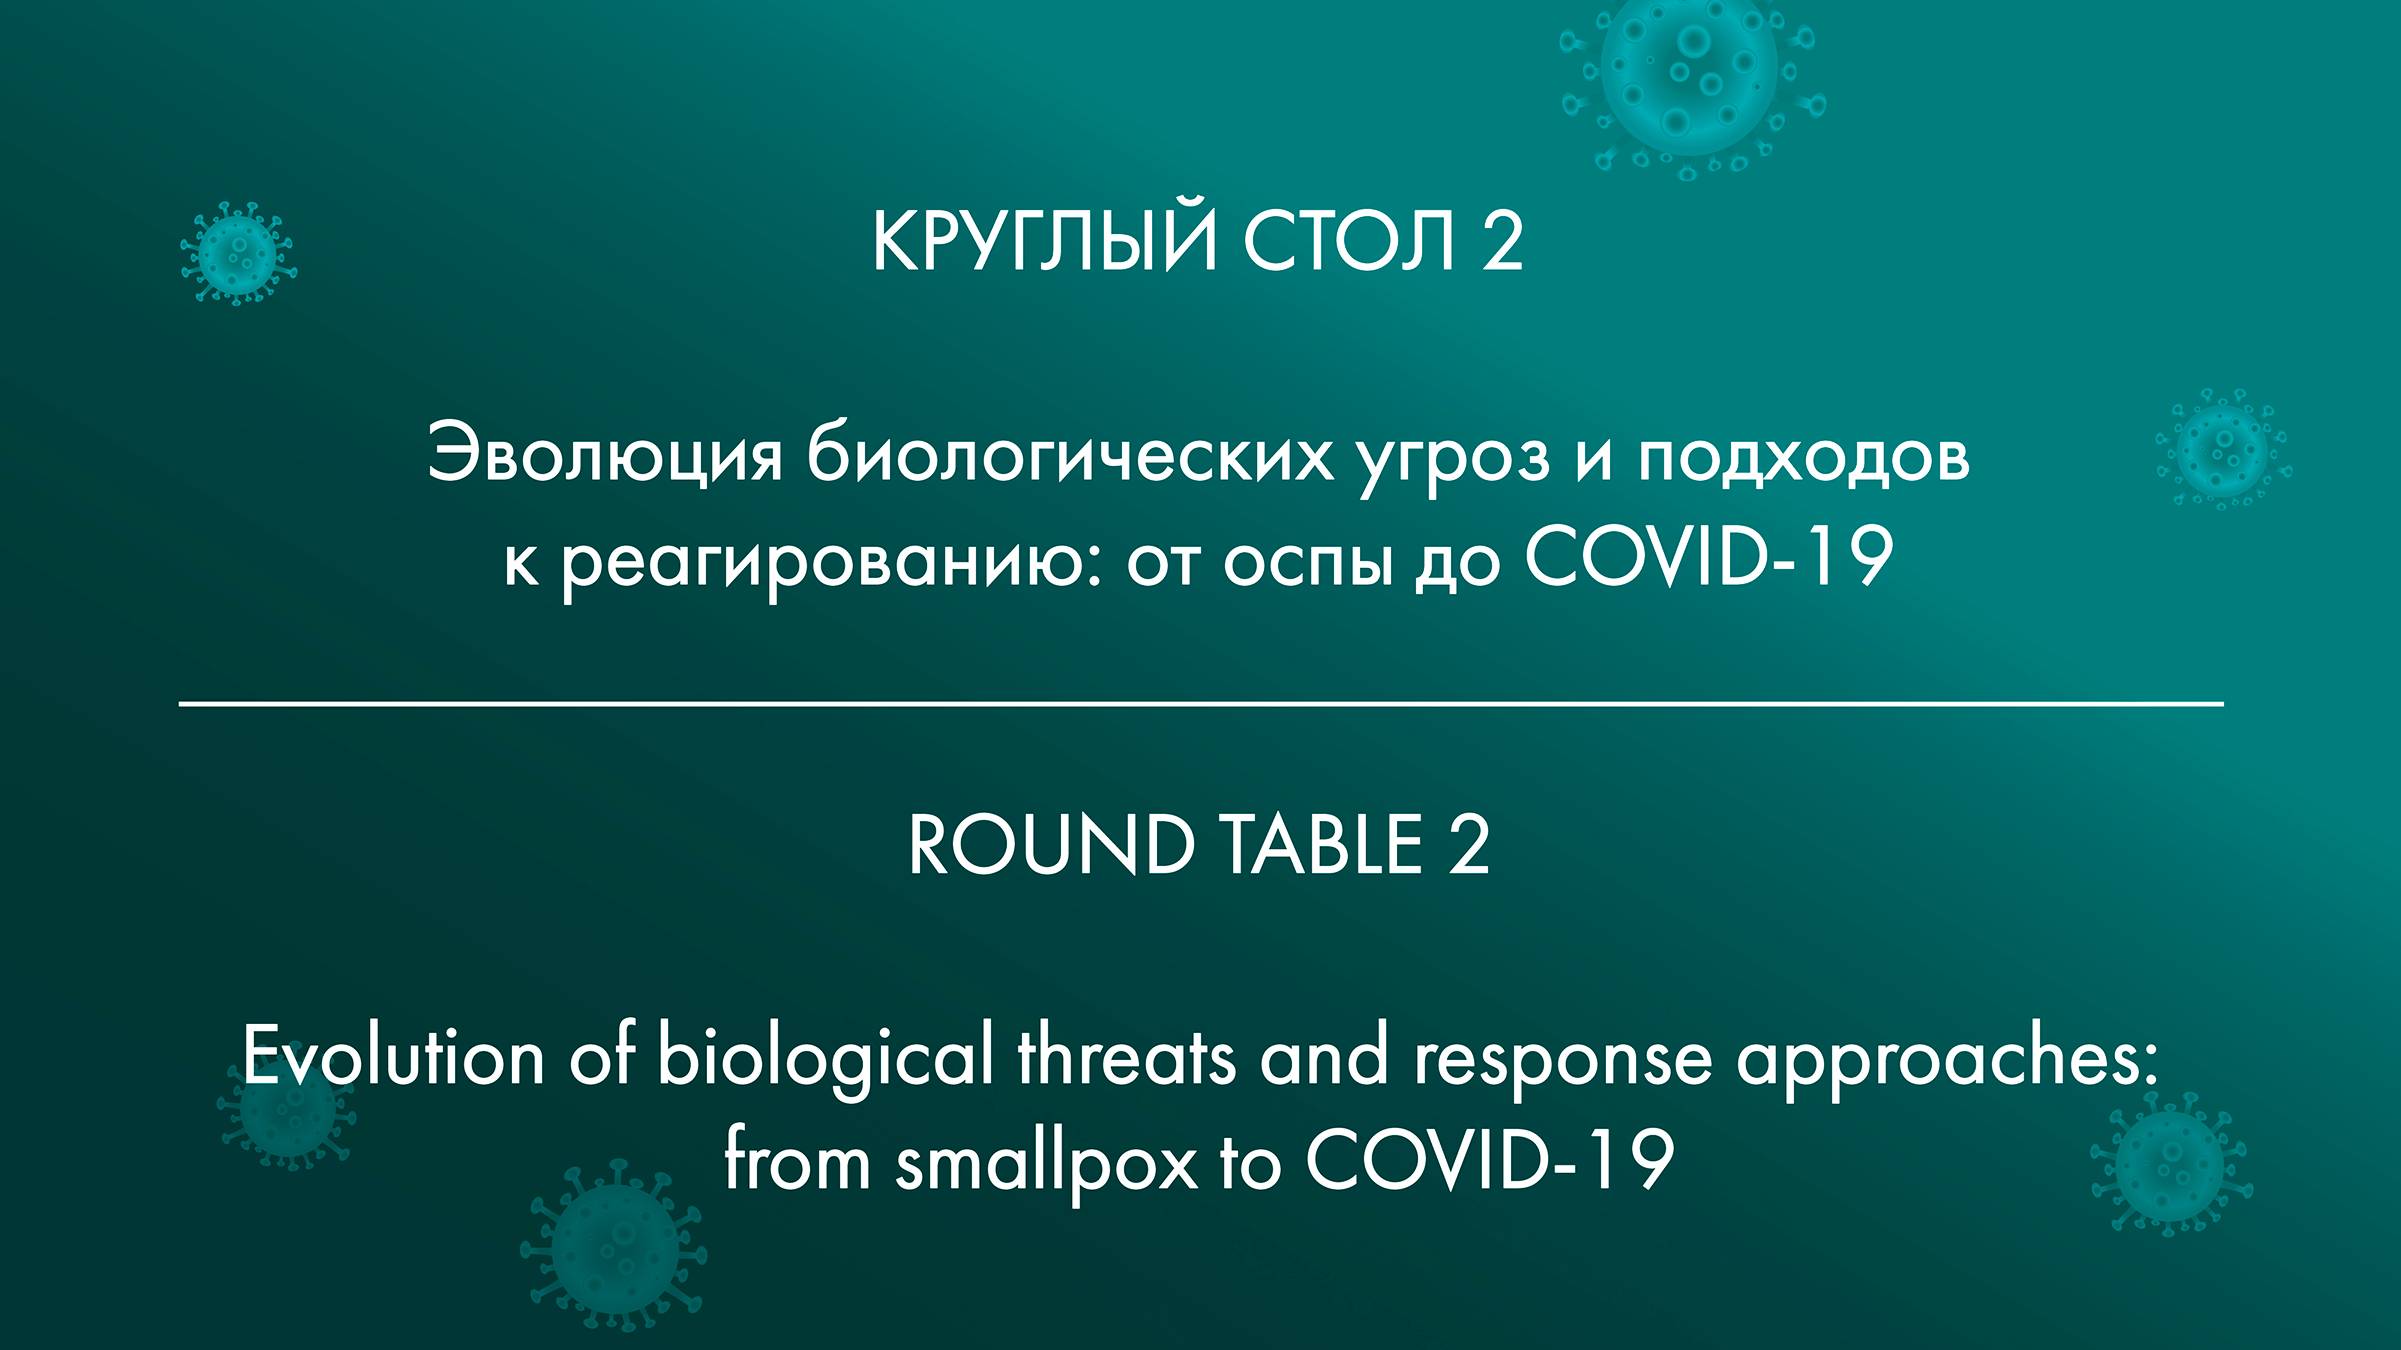 ROUND TABLE 2 Evolution of biological threats and response approaches: from smallpox to COVID-19